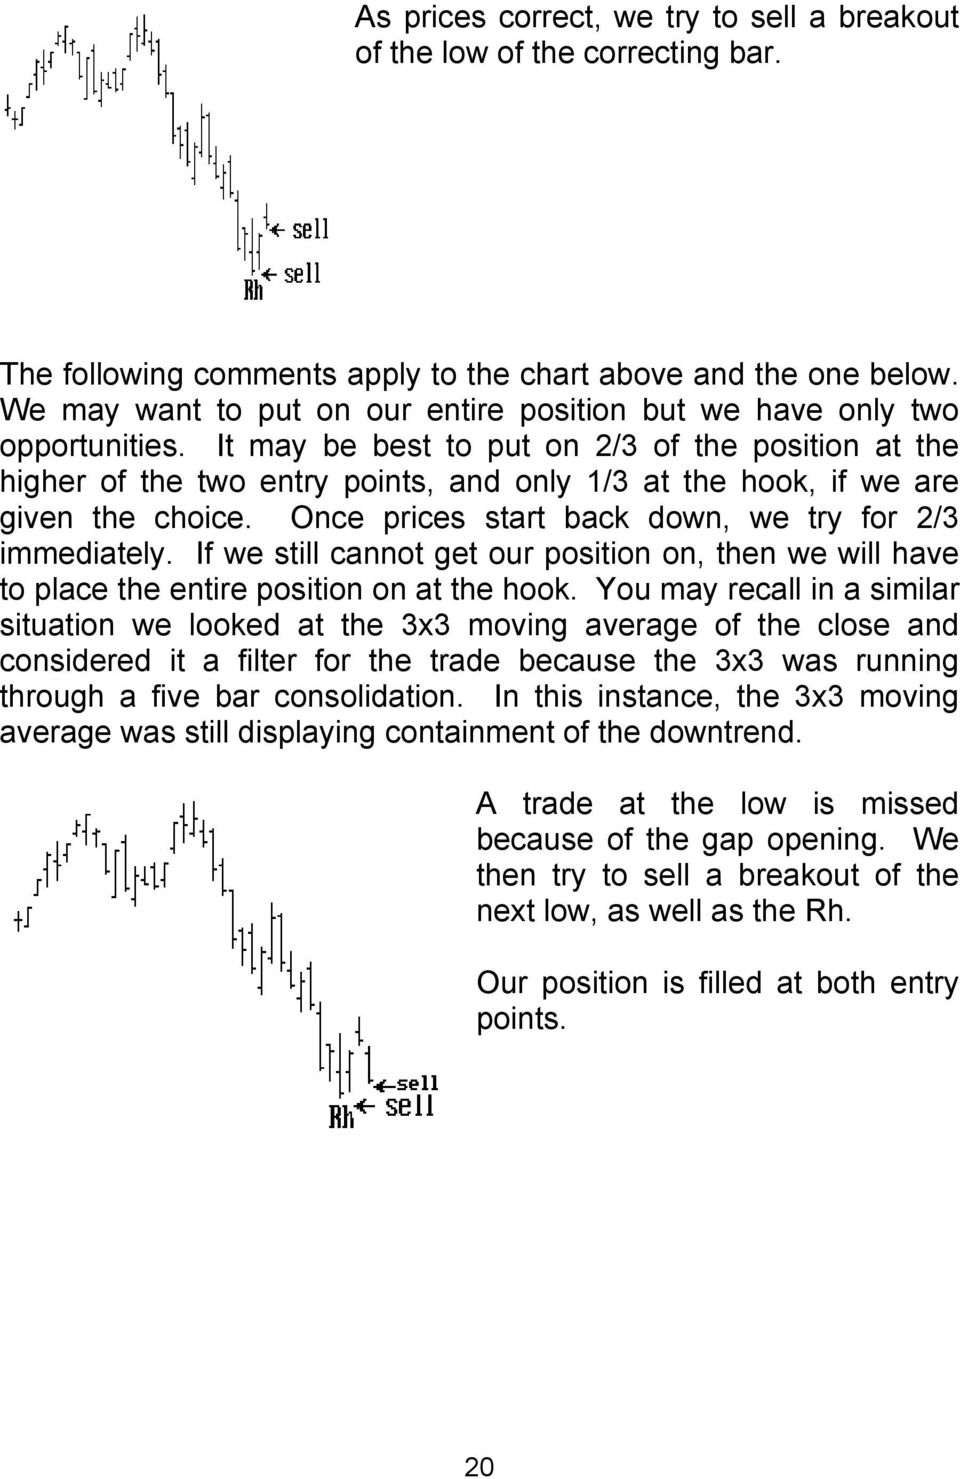 It may be best to put on 2/3 of the position at the higher of the two entry points, and only 1/3 at the hook, if we are given the choice. Once prices start back down, we try for 2/3 immediately.